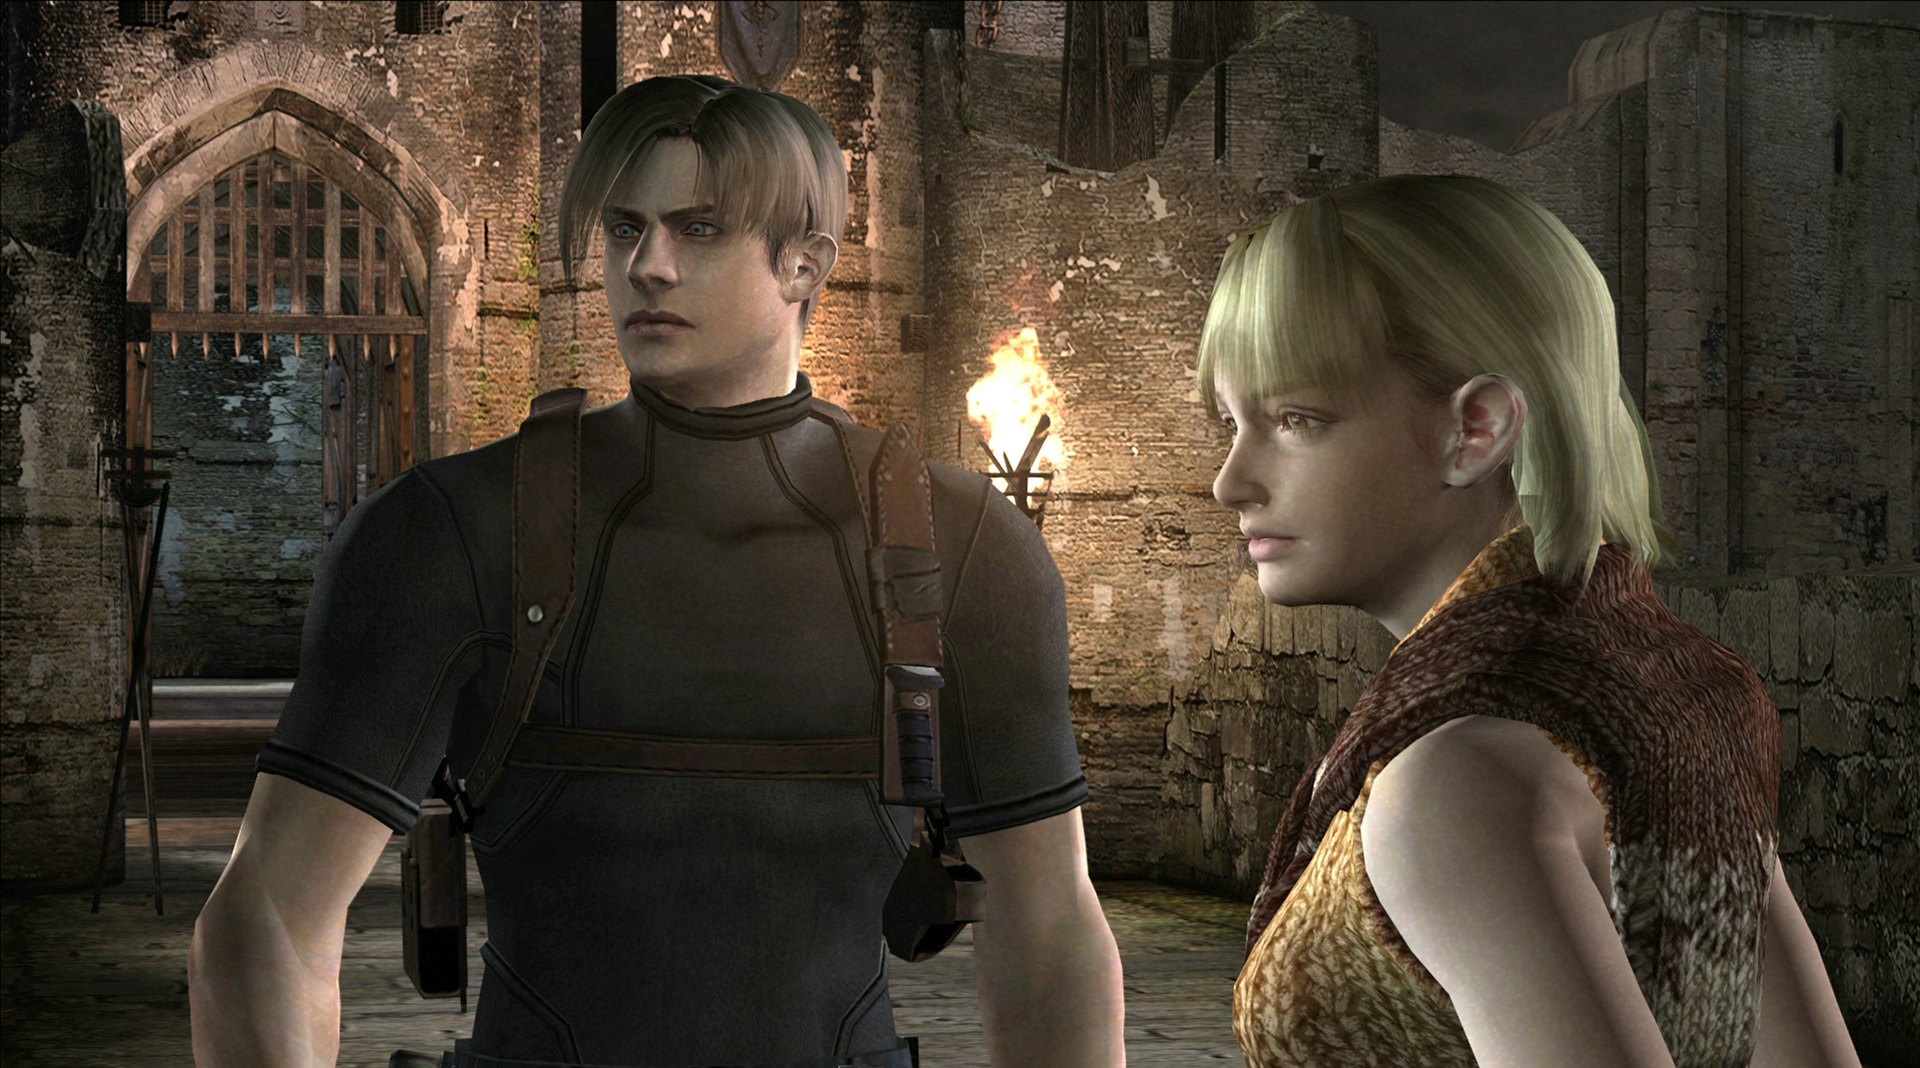 Resident Evil officially acknowledges Mouseley in a cheesy tweet